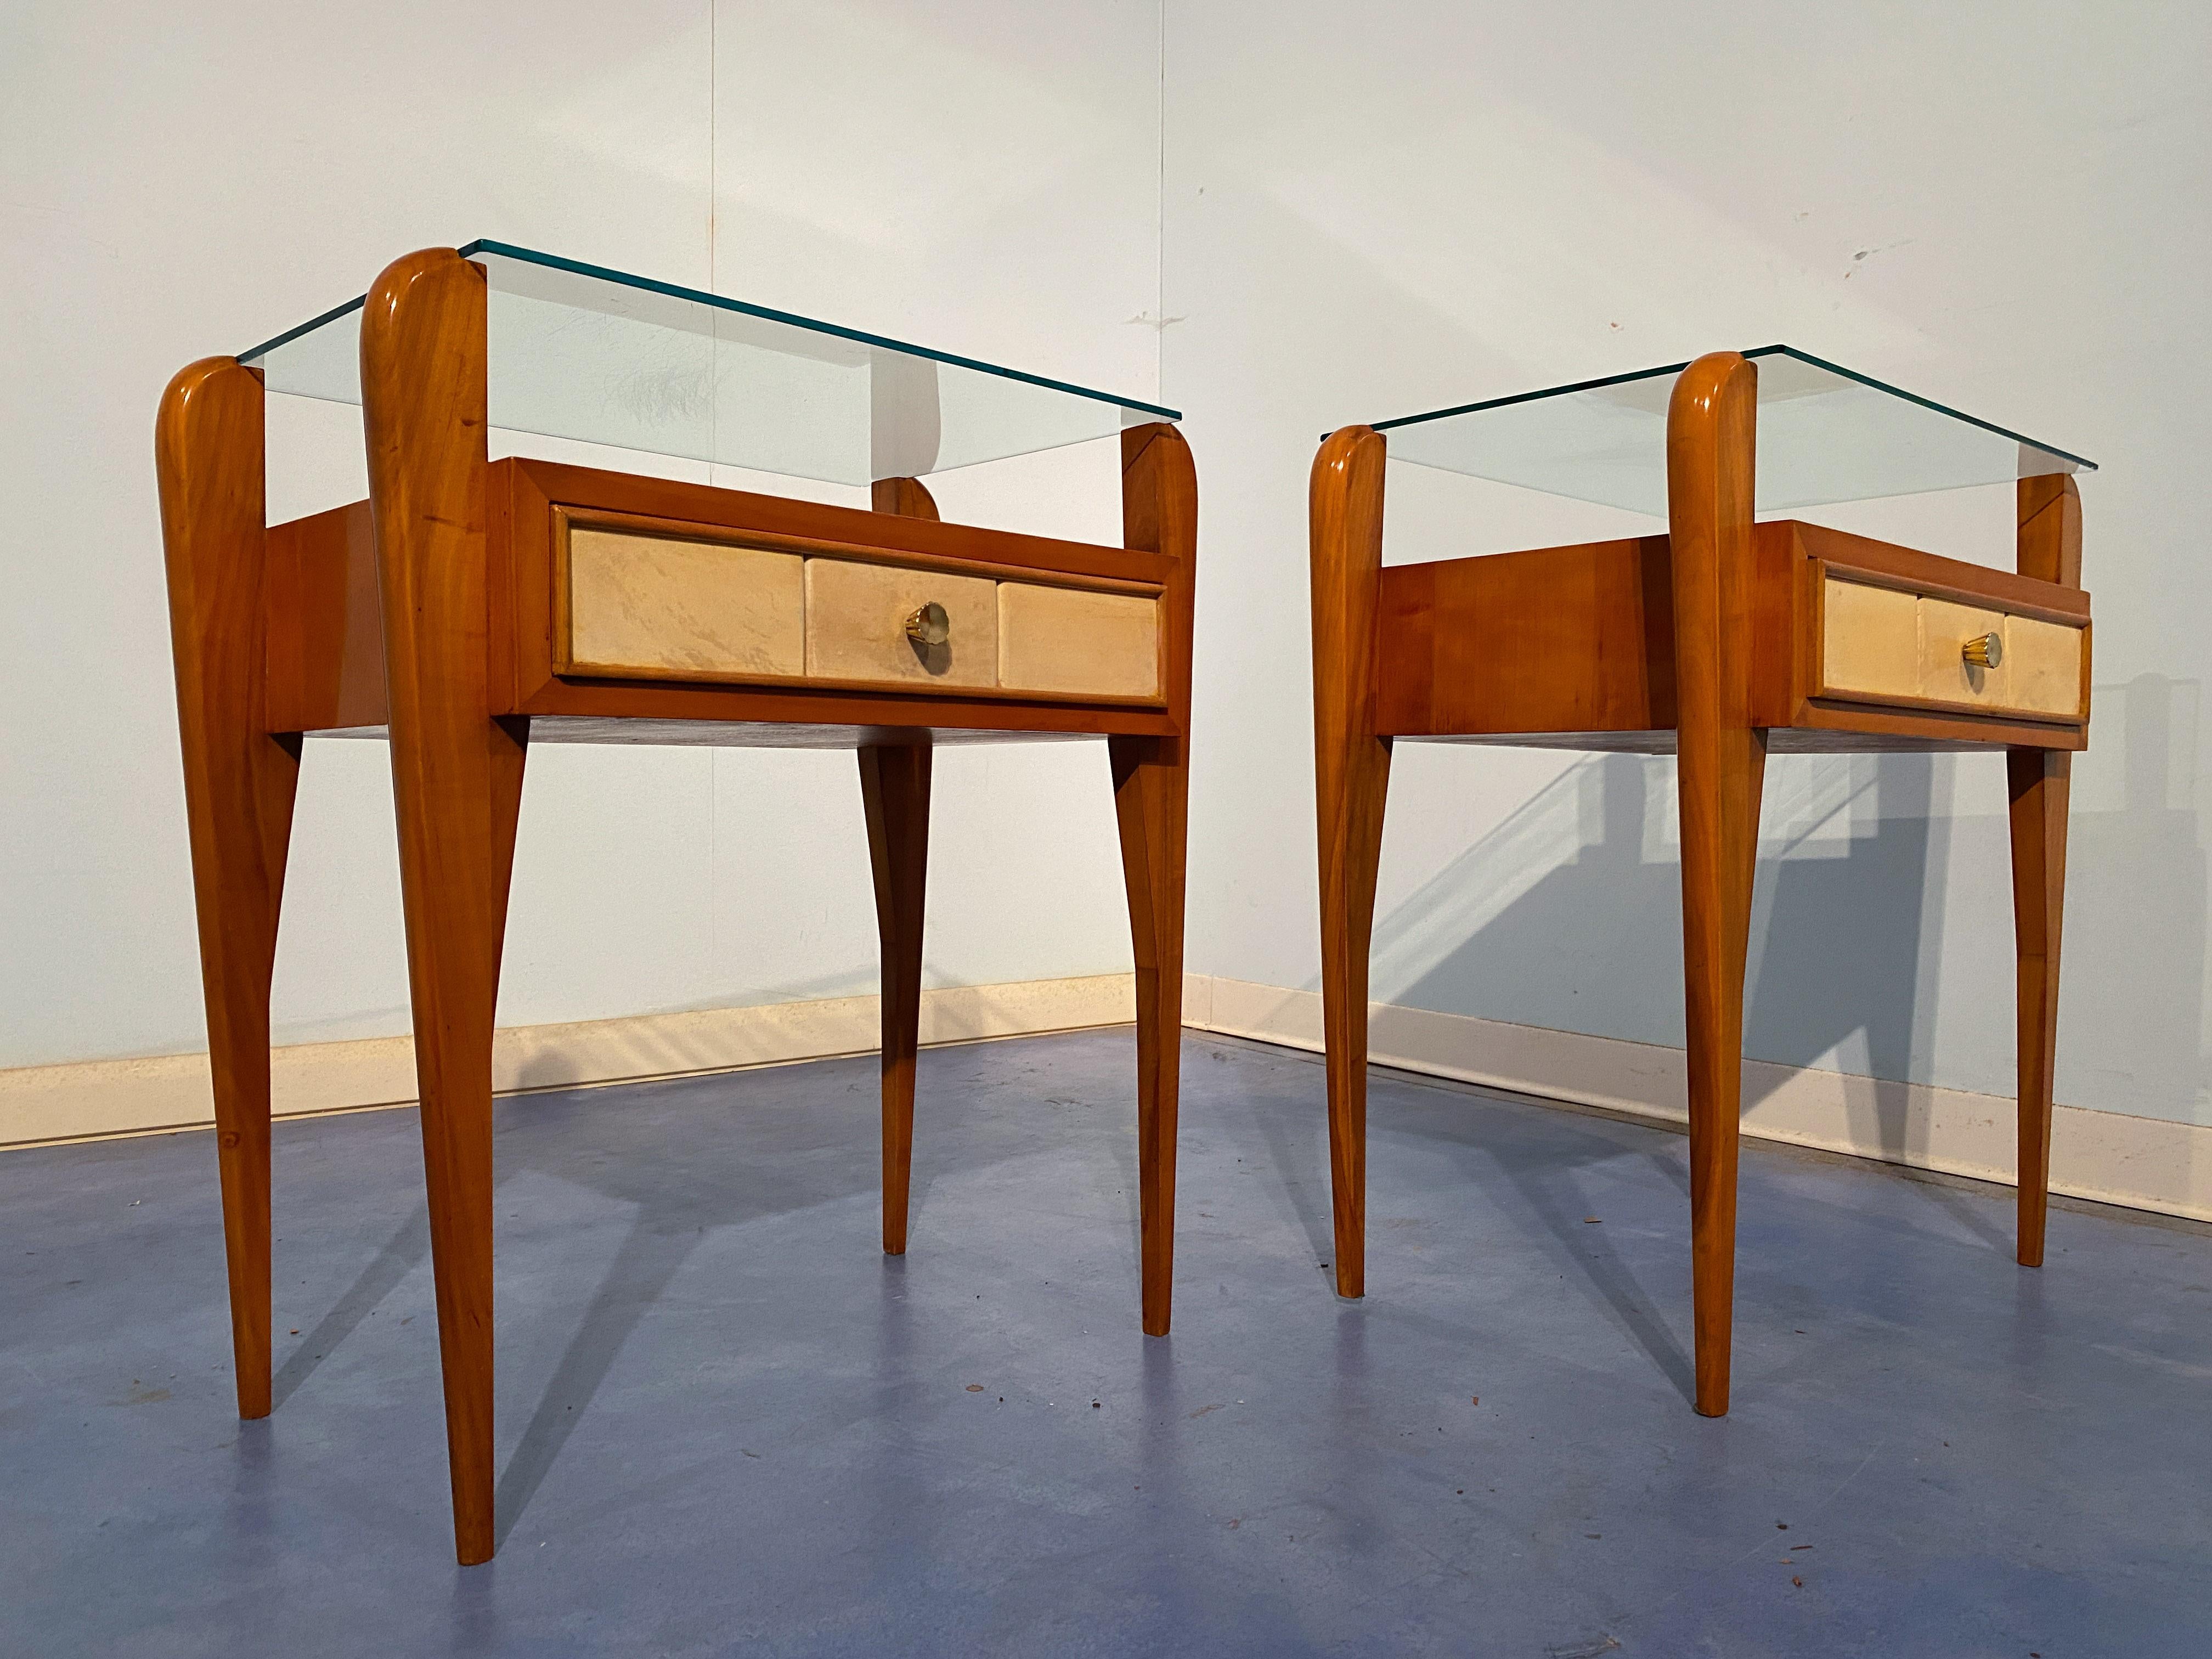 Italian Mid-Century Parchment Bedside or Nightstands by Osvaldo Borsani, 1950 For Sale 7